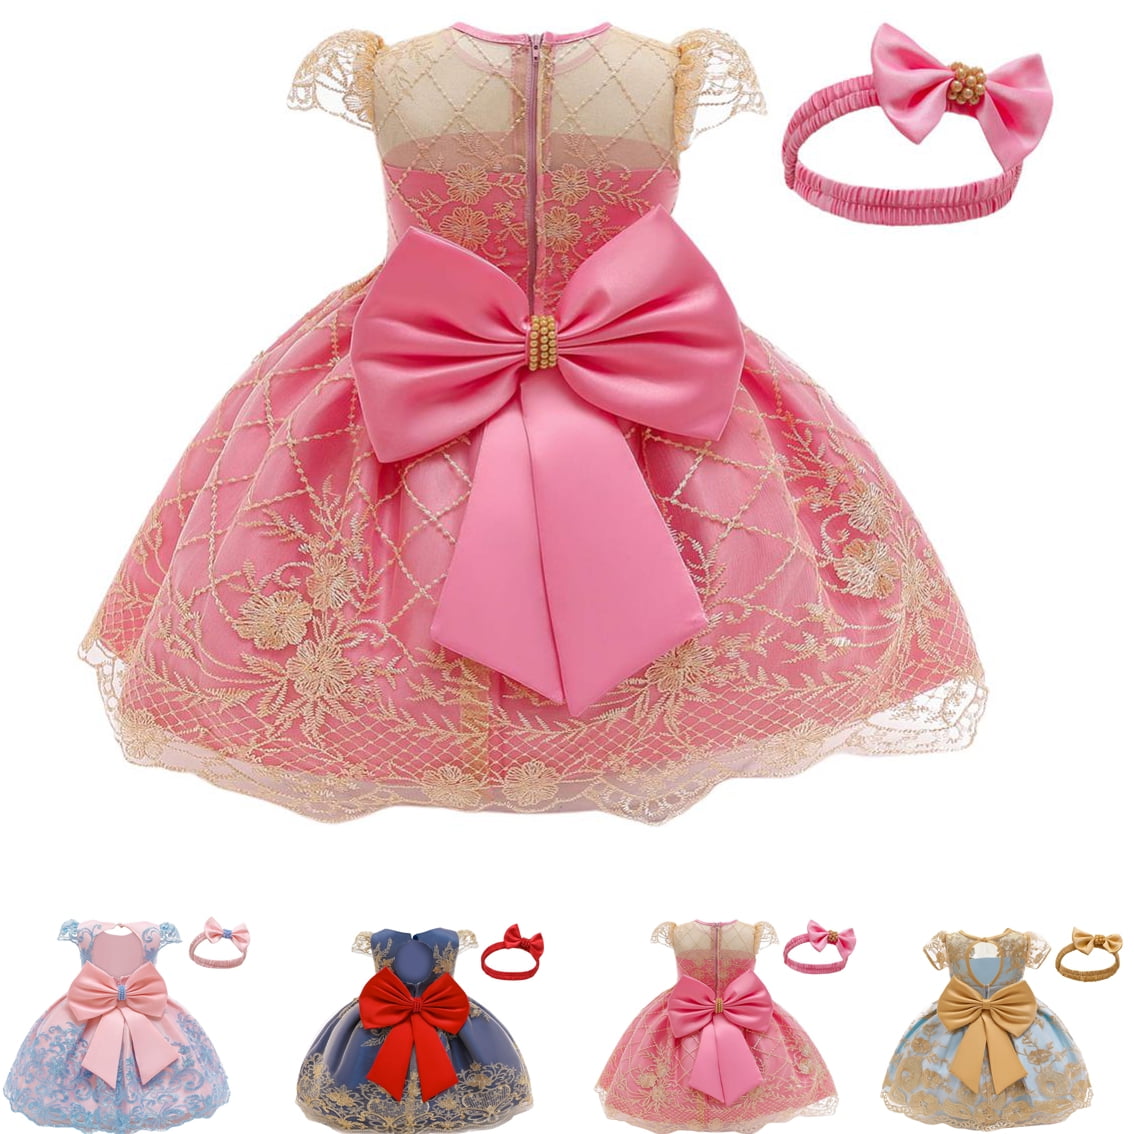 0-2 Years Baby Girls Pageant Lace Dresses Toddler Party Embroideryr Dress with Headwear 